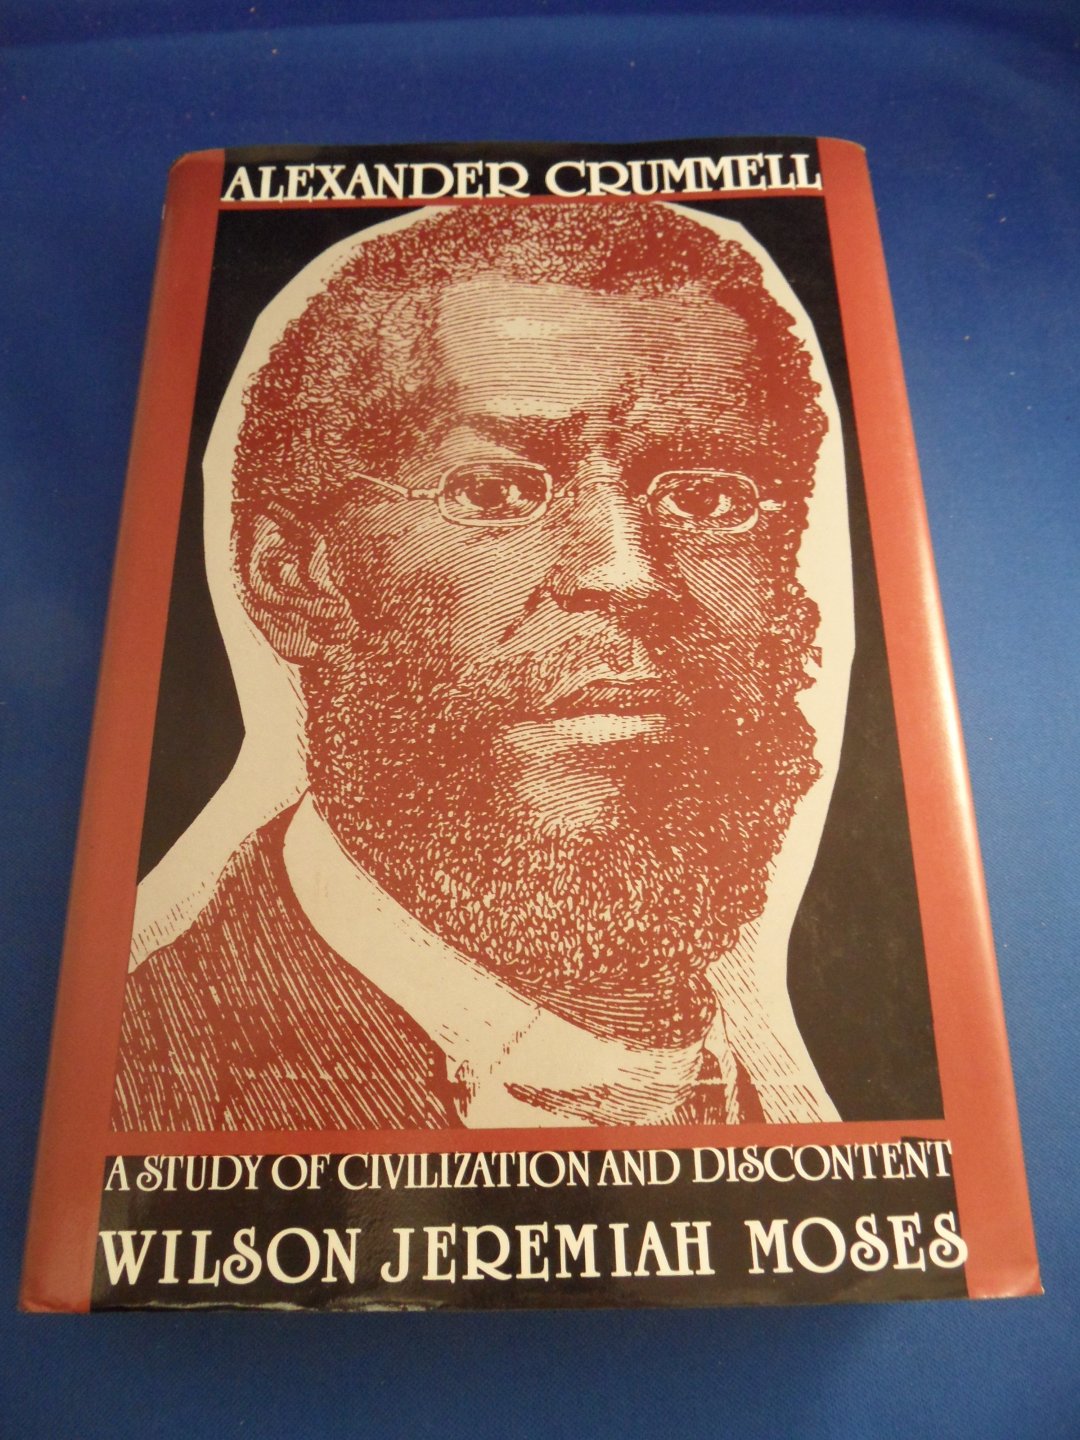 Moses, Wilon Jeremiah - Alexander Crummell. A study of civilization and discontent